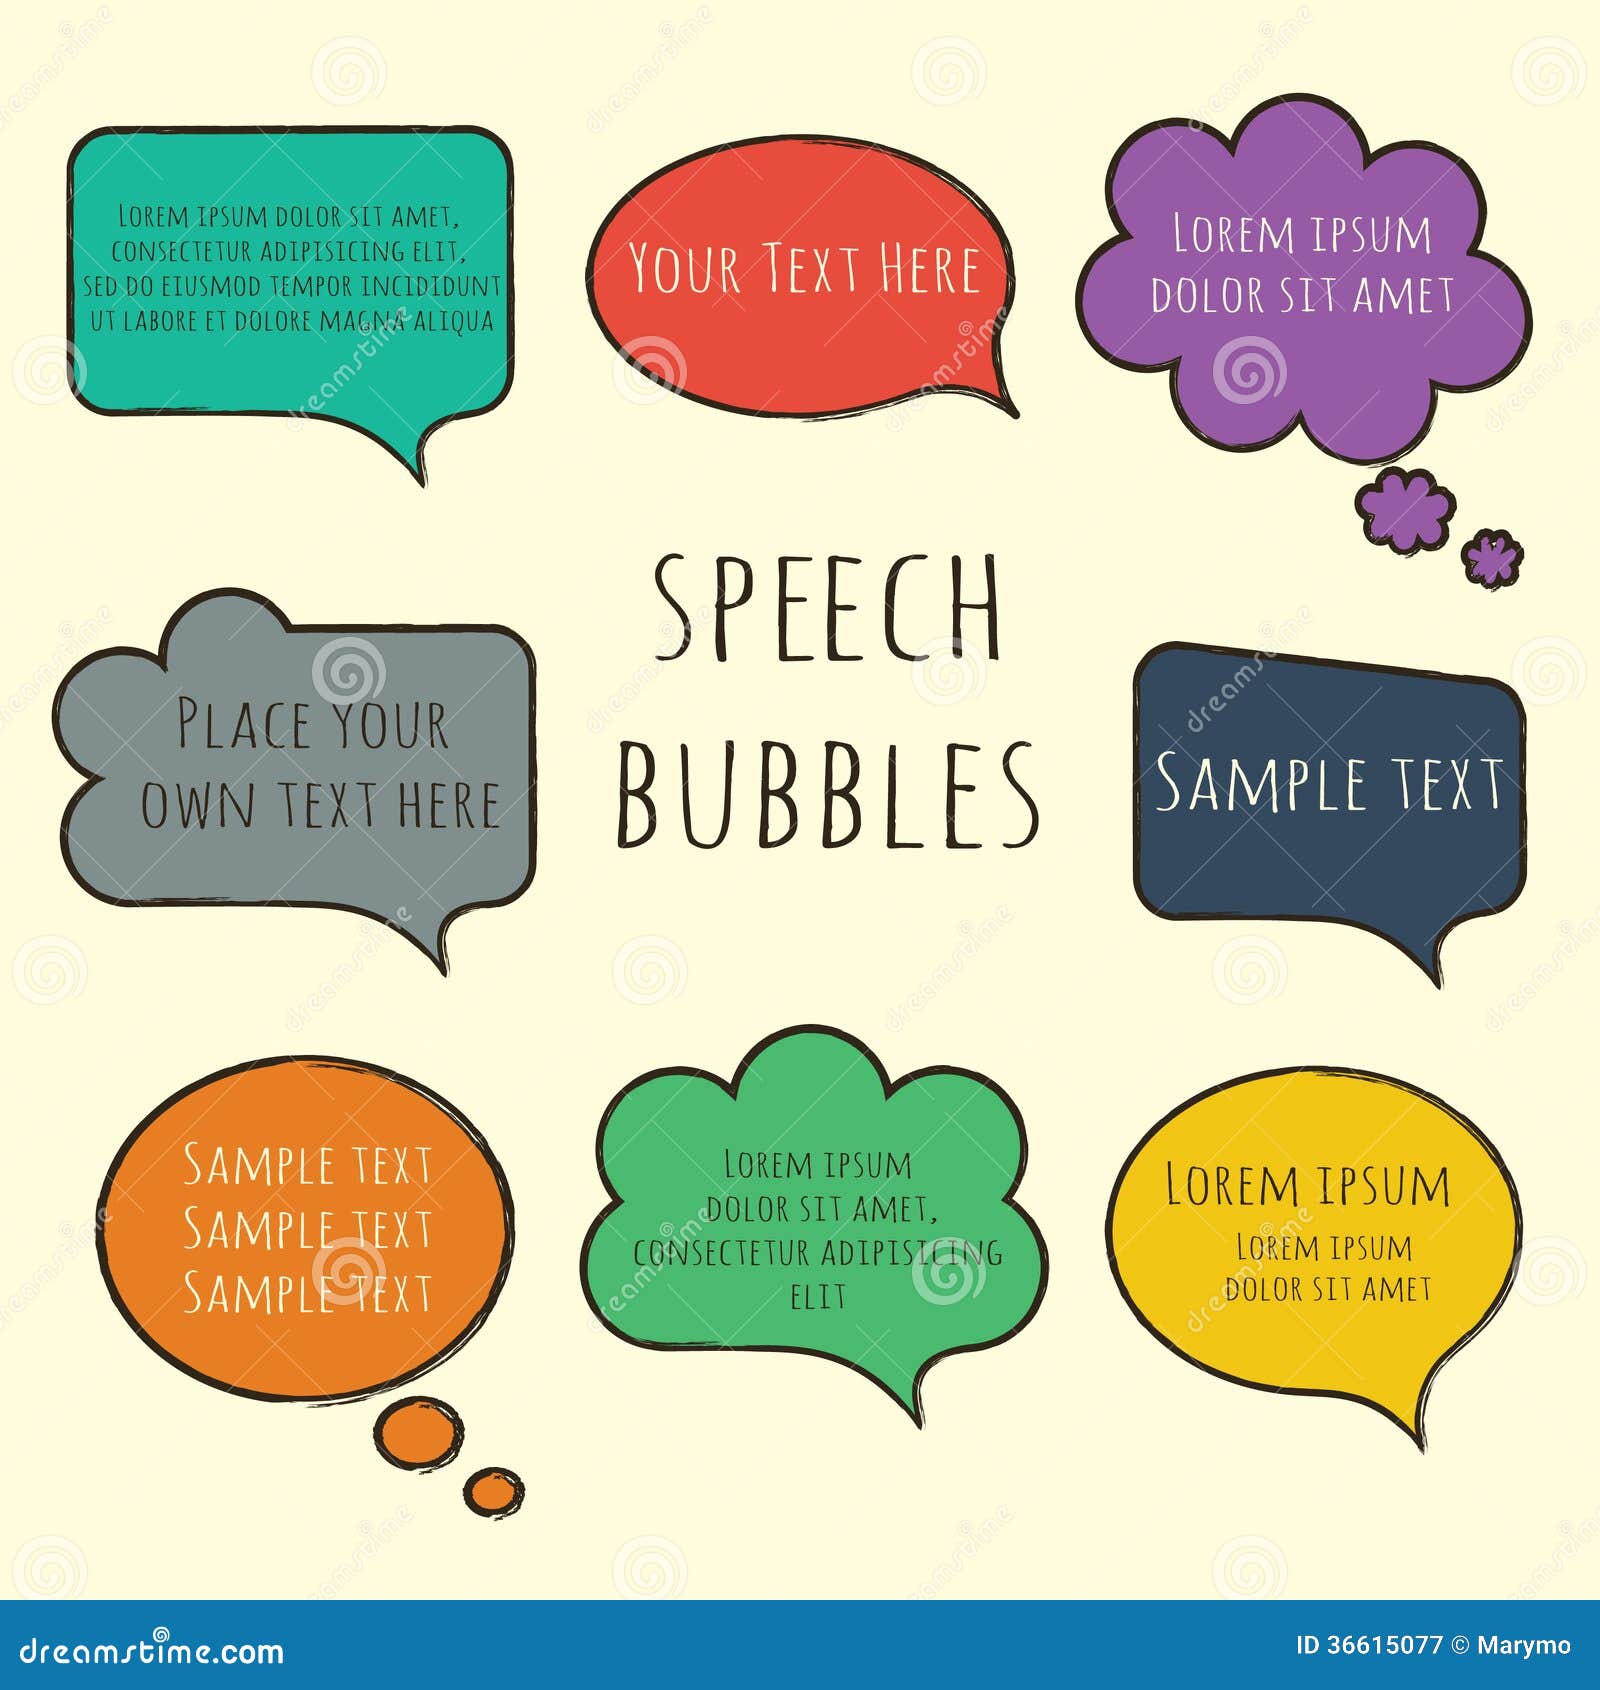 how to make text in speech bubble